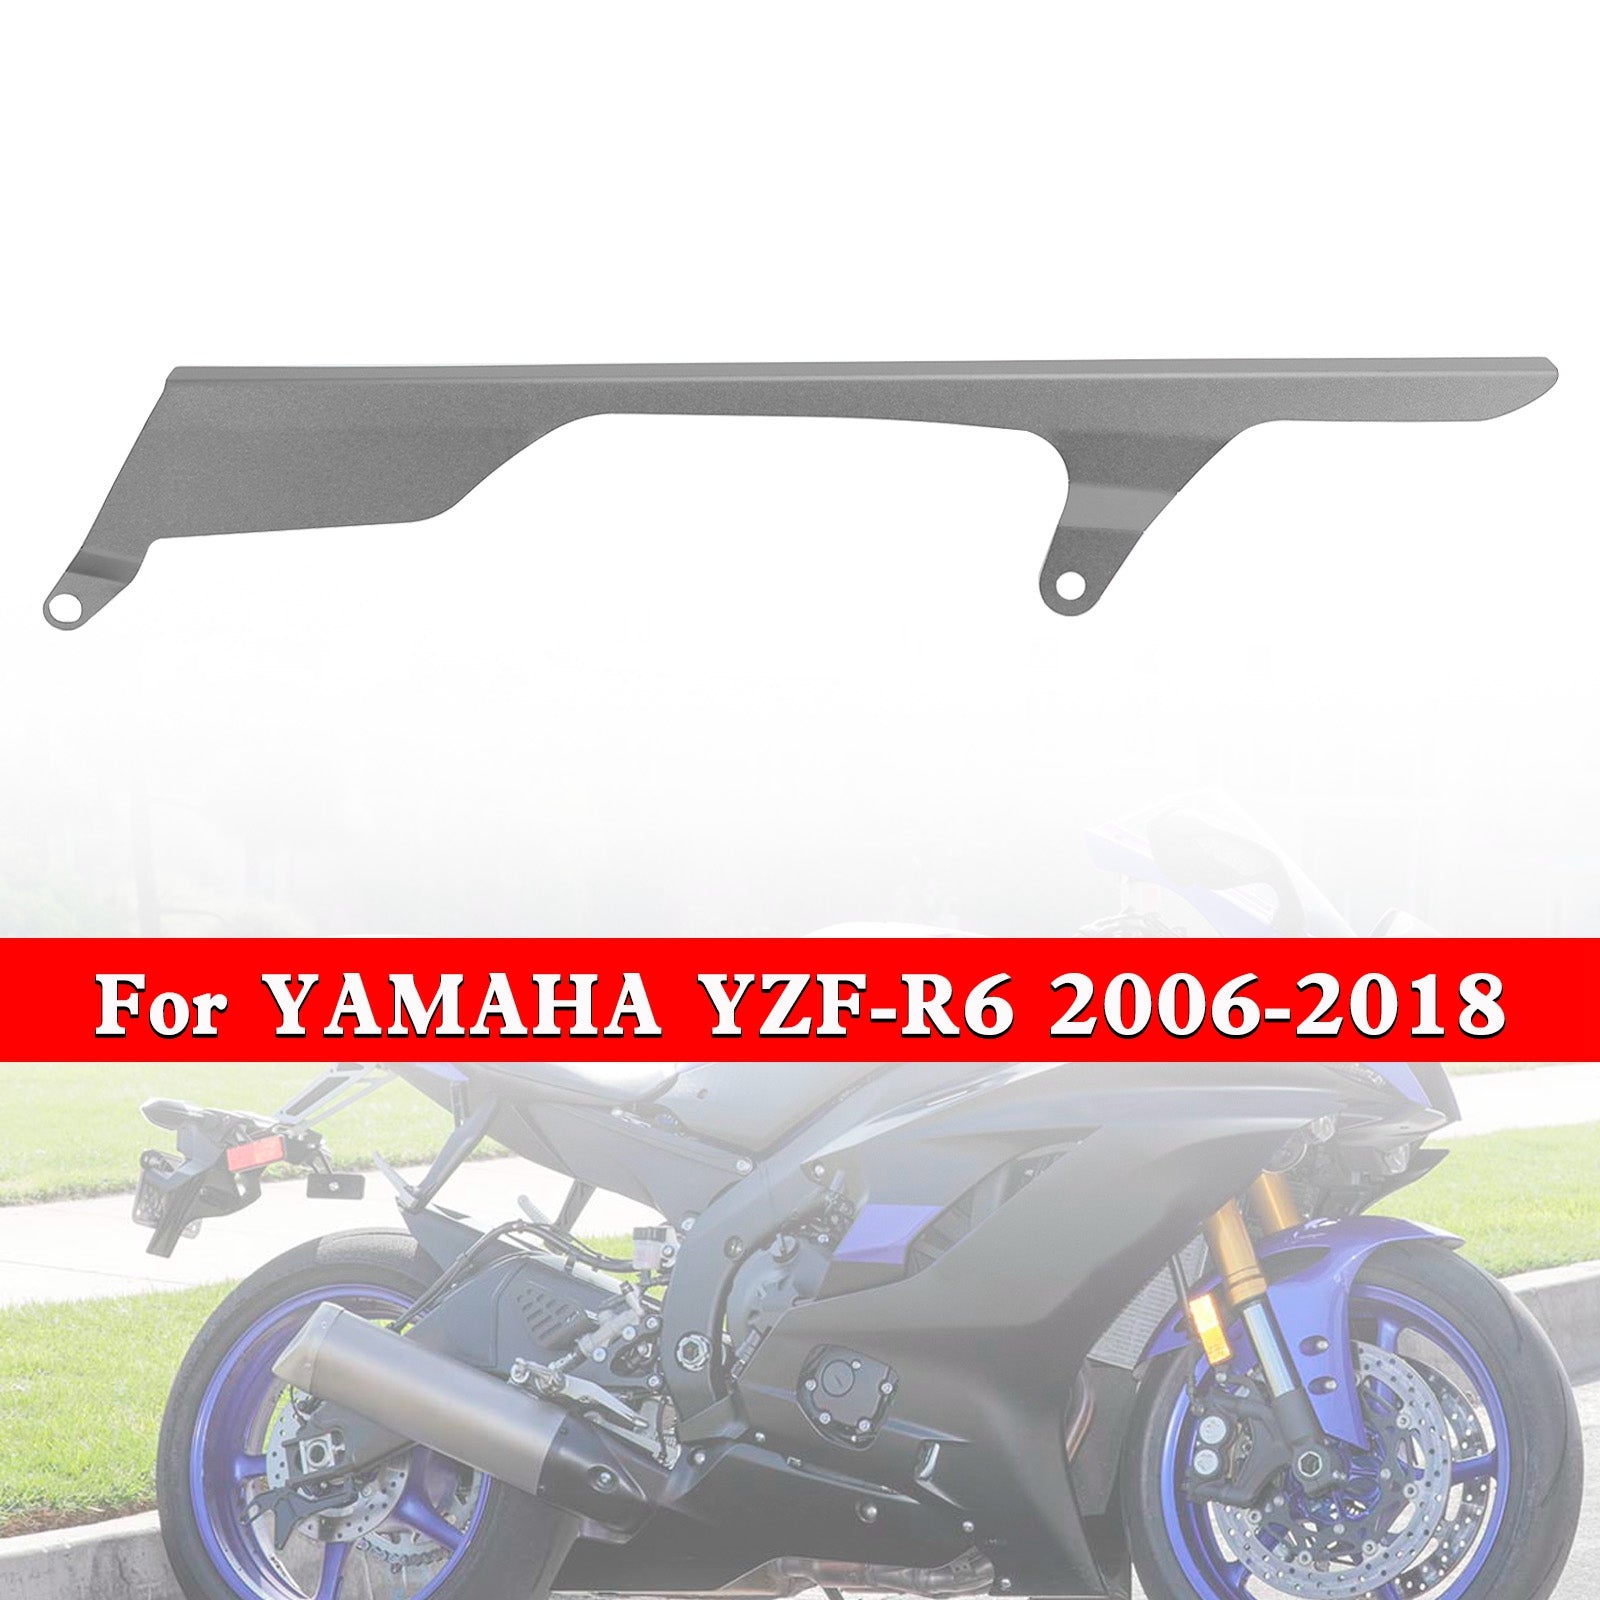 Rear Sprocket Chain Guard Protector Cover For YAMAHA YZF R6 2006-2018